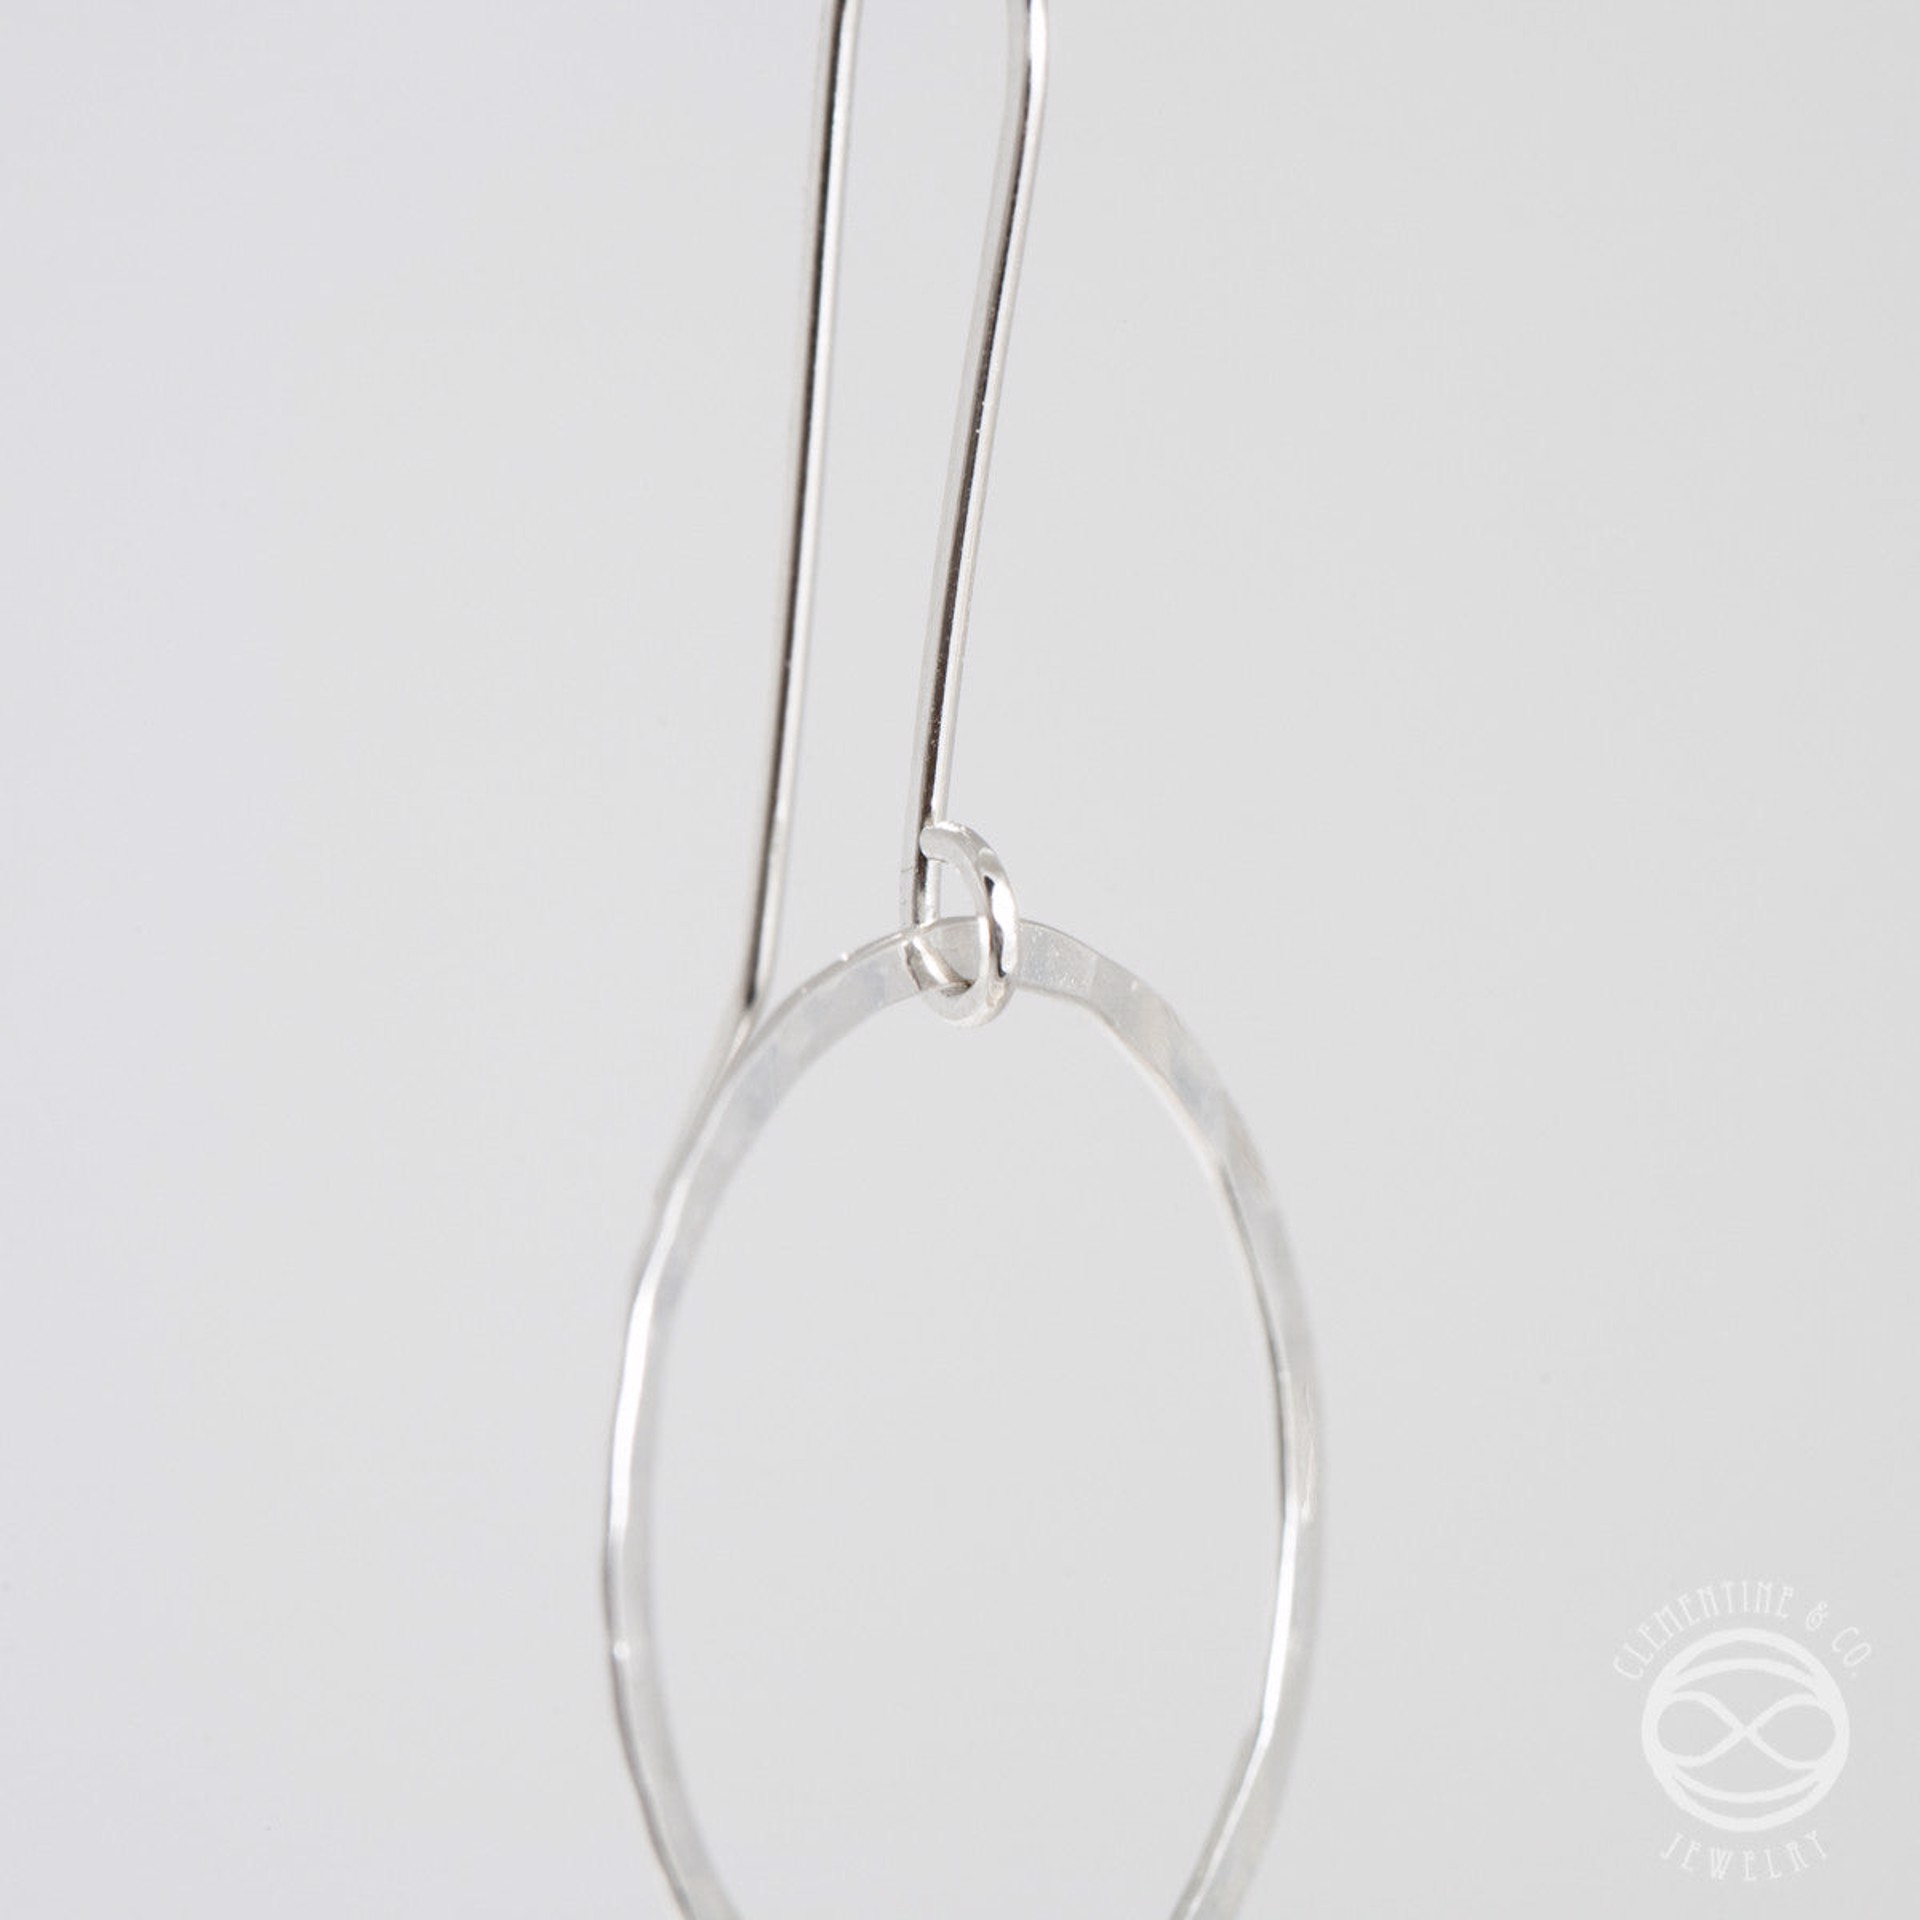 Circle Earrings in Sterling Silver by Clementine & Co. Jewelry